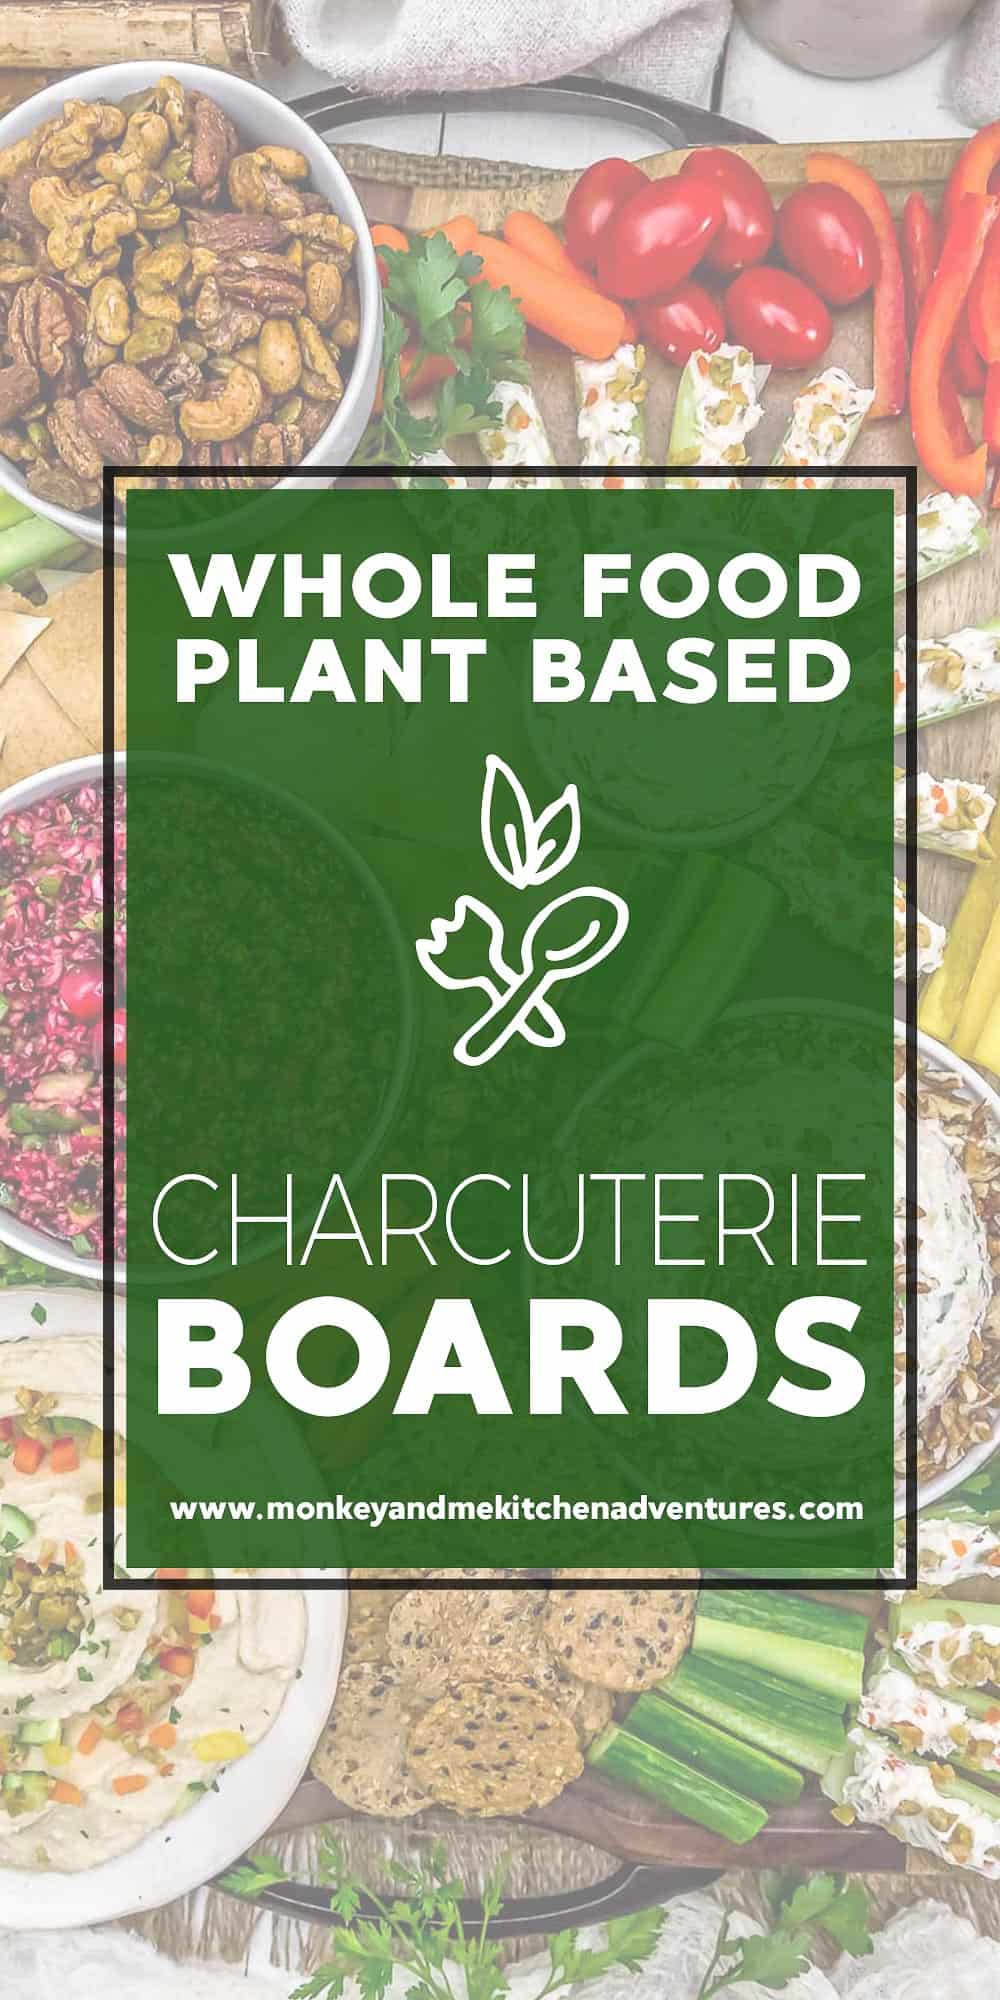 Whole Food Plant Based Charcuterie Boards